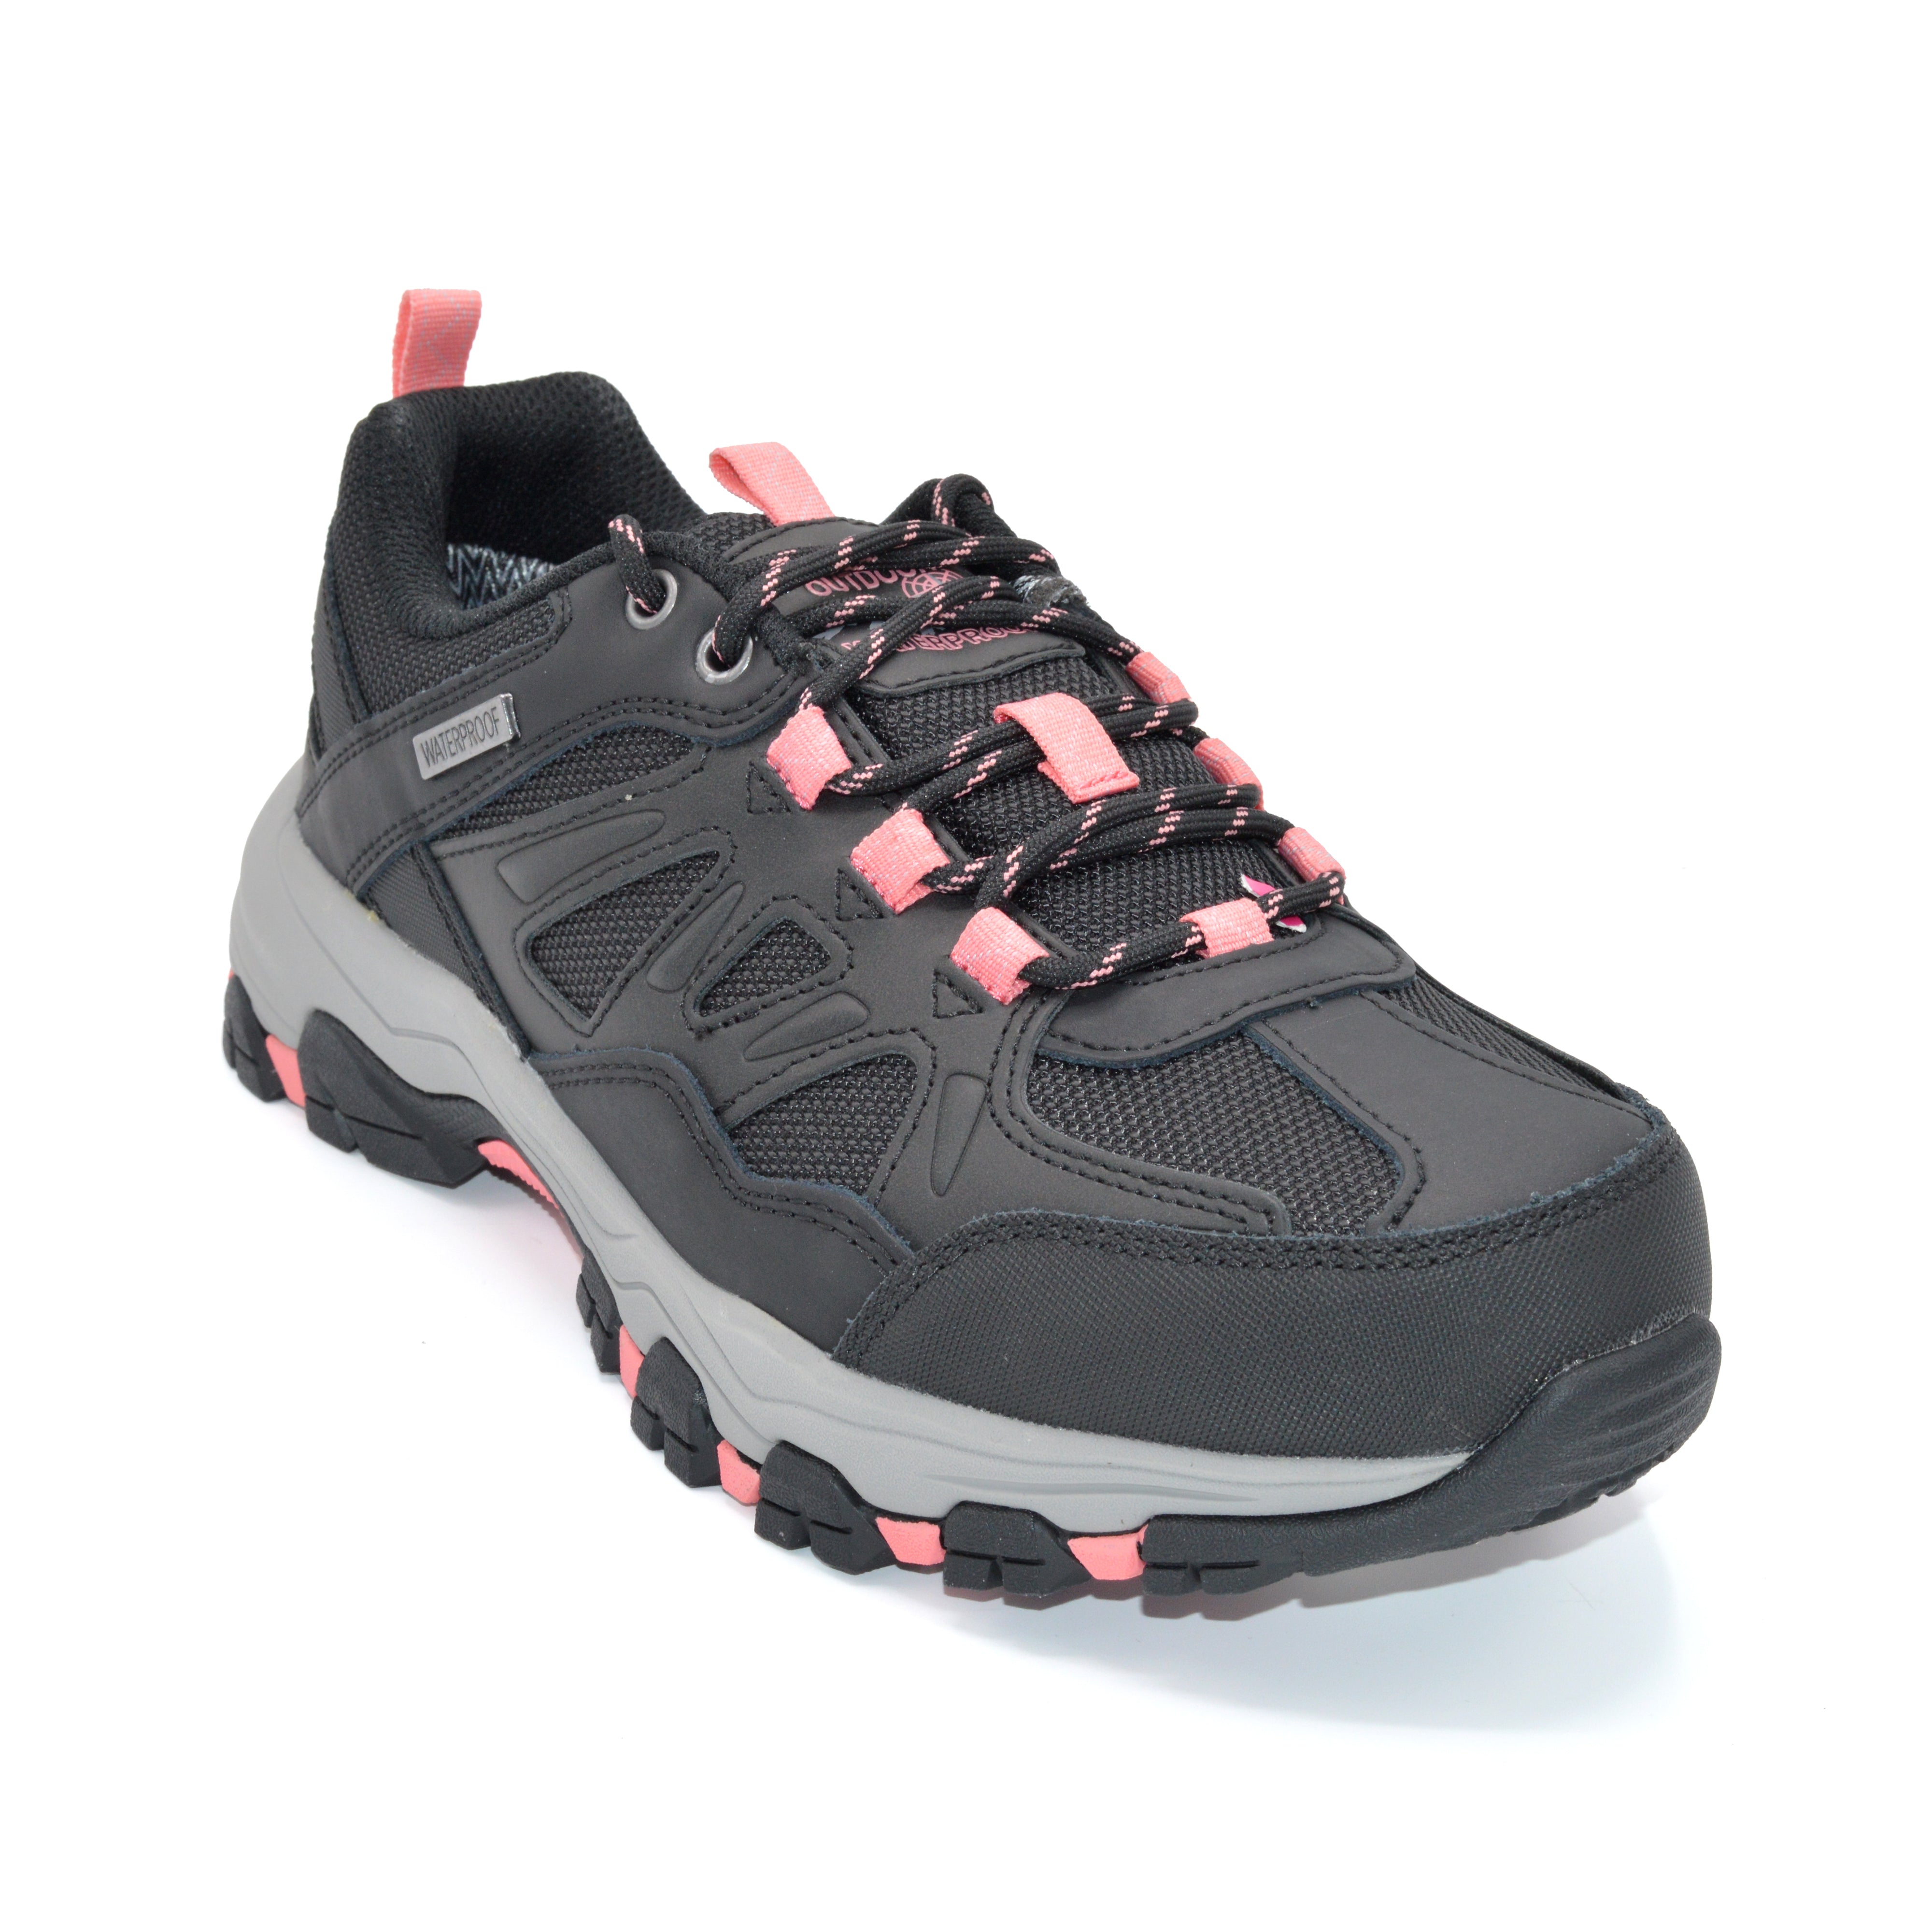 Waterproof Wider Fit Trainers For Bunions